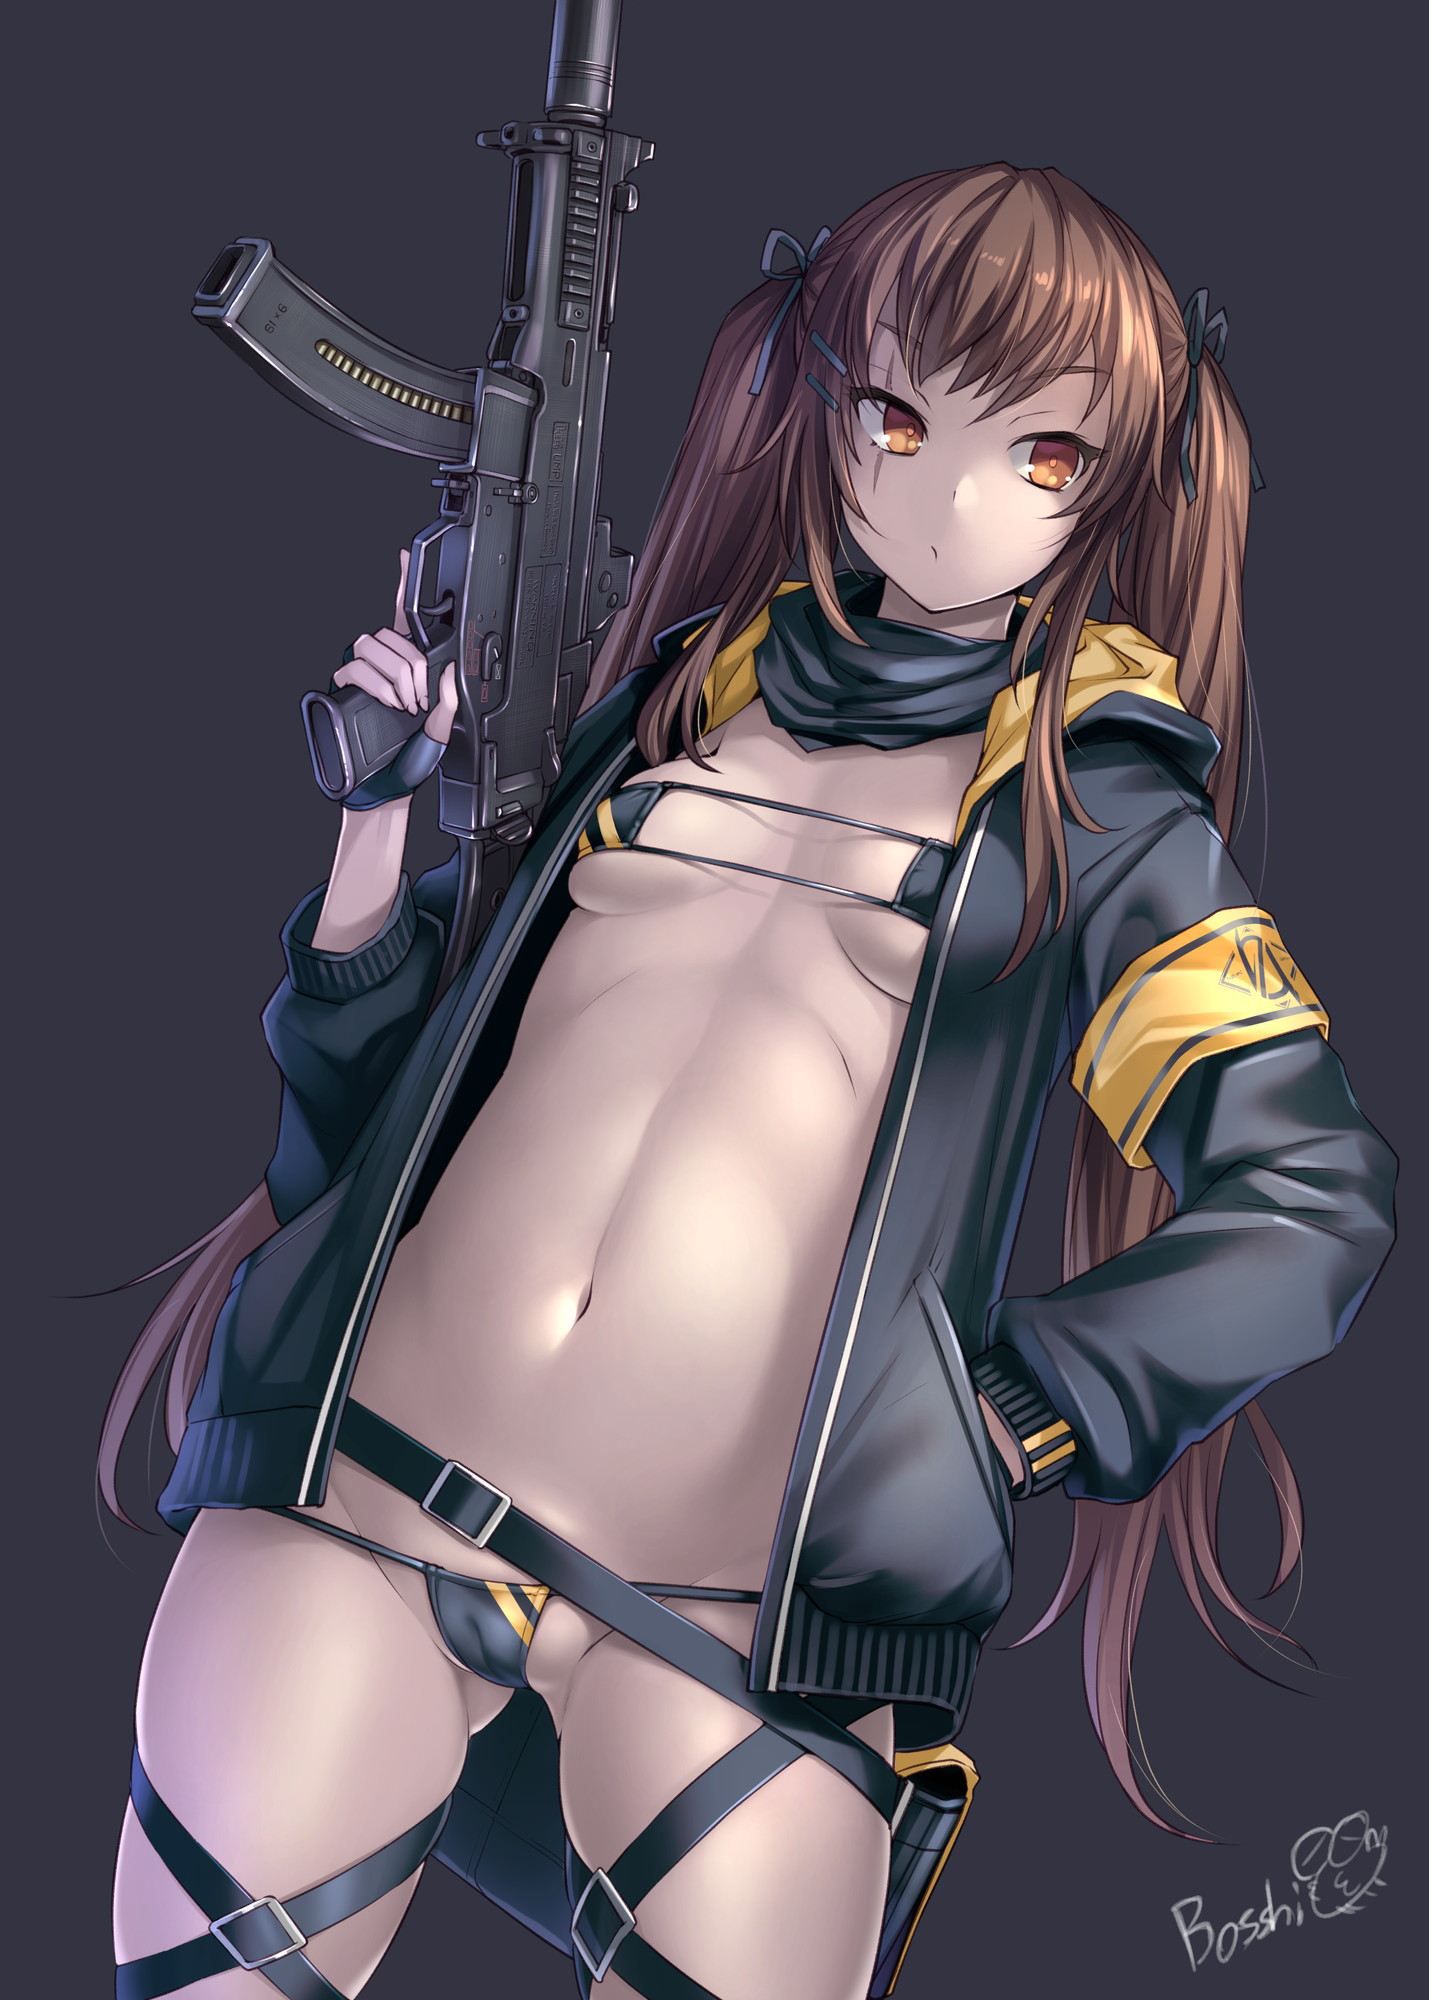 【With images】 UMP45 is a dark customs and the real ban www (Dolls Frontline) 17